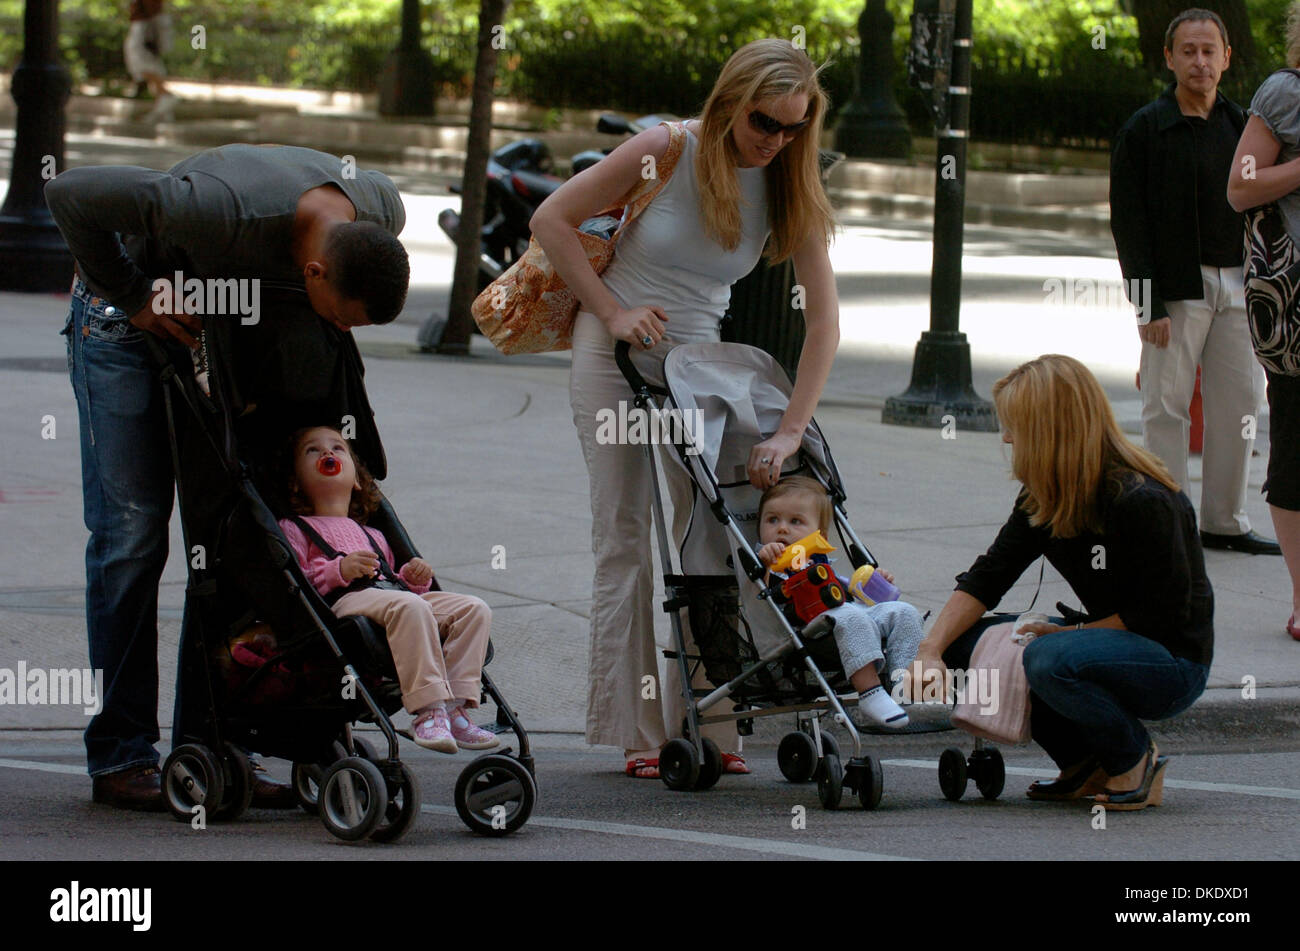 Jun 06, 2007 - Chicago, IL, USA - ALEX RODRIGUEZ speaks with his daughter Natasha (L) while CYNTHIA RODRIGUEZ (R) speaks to an unidentified friends child while out in Chicago. Alex Rodriguez spent the afternoon having lunch and coffee with his family as rumors of an alleged affair with a blond stripper splashed across the headlines last week.  (Credit Image: © Bryan Smith/ZUMA Pres Stock Photo